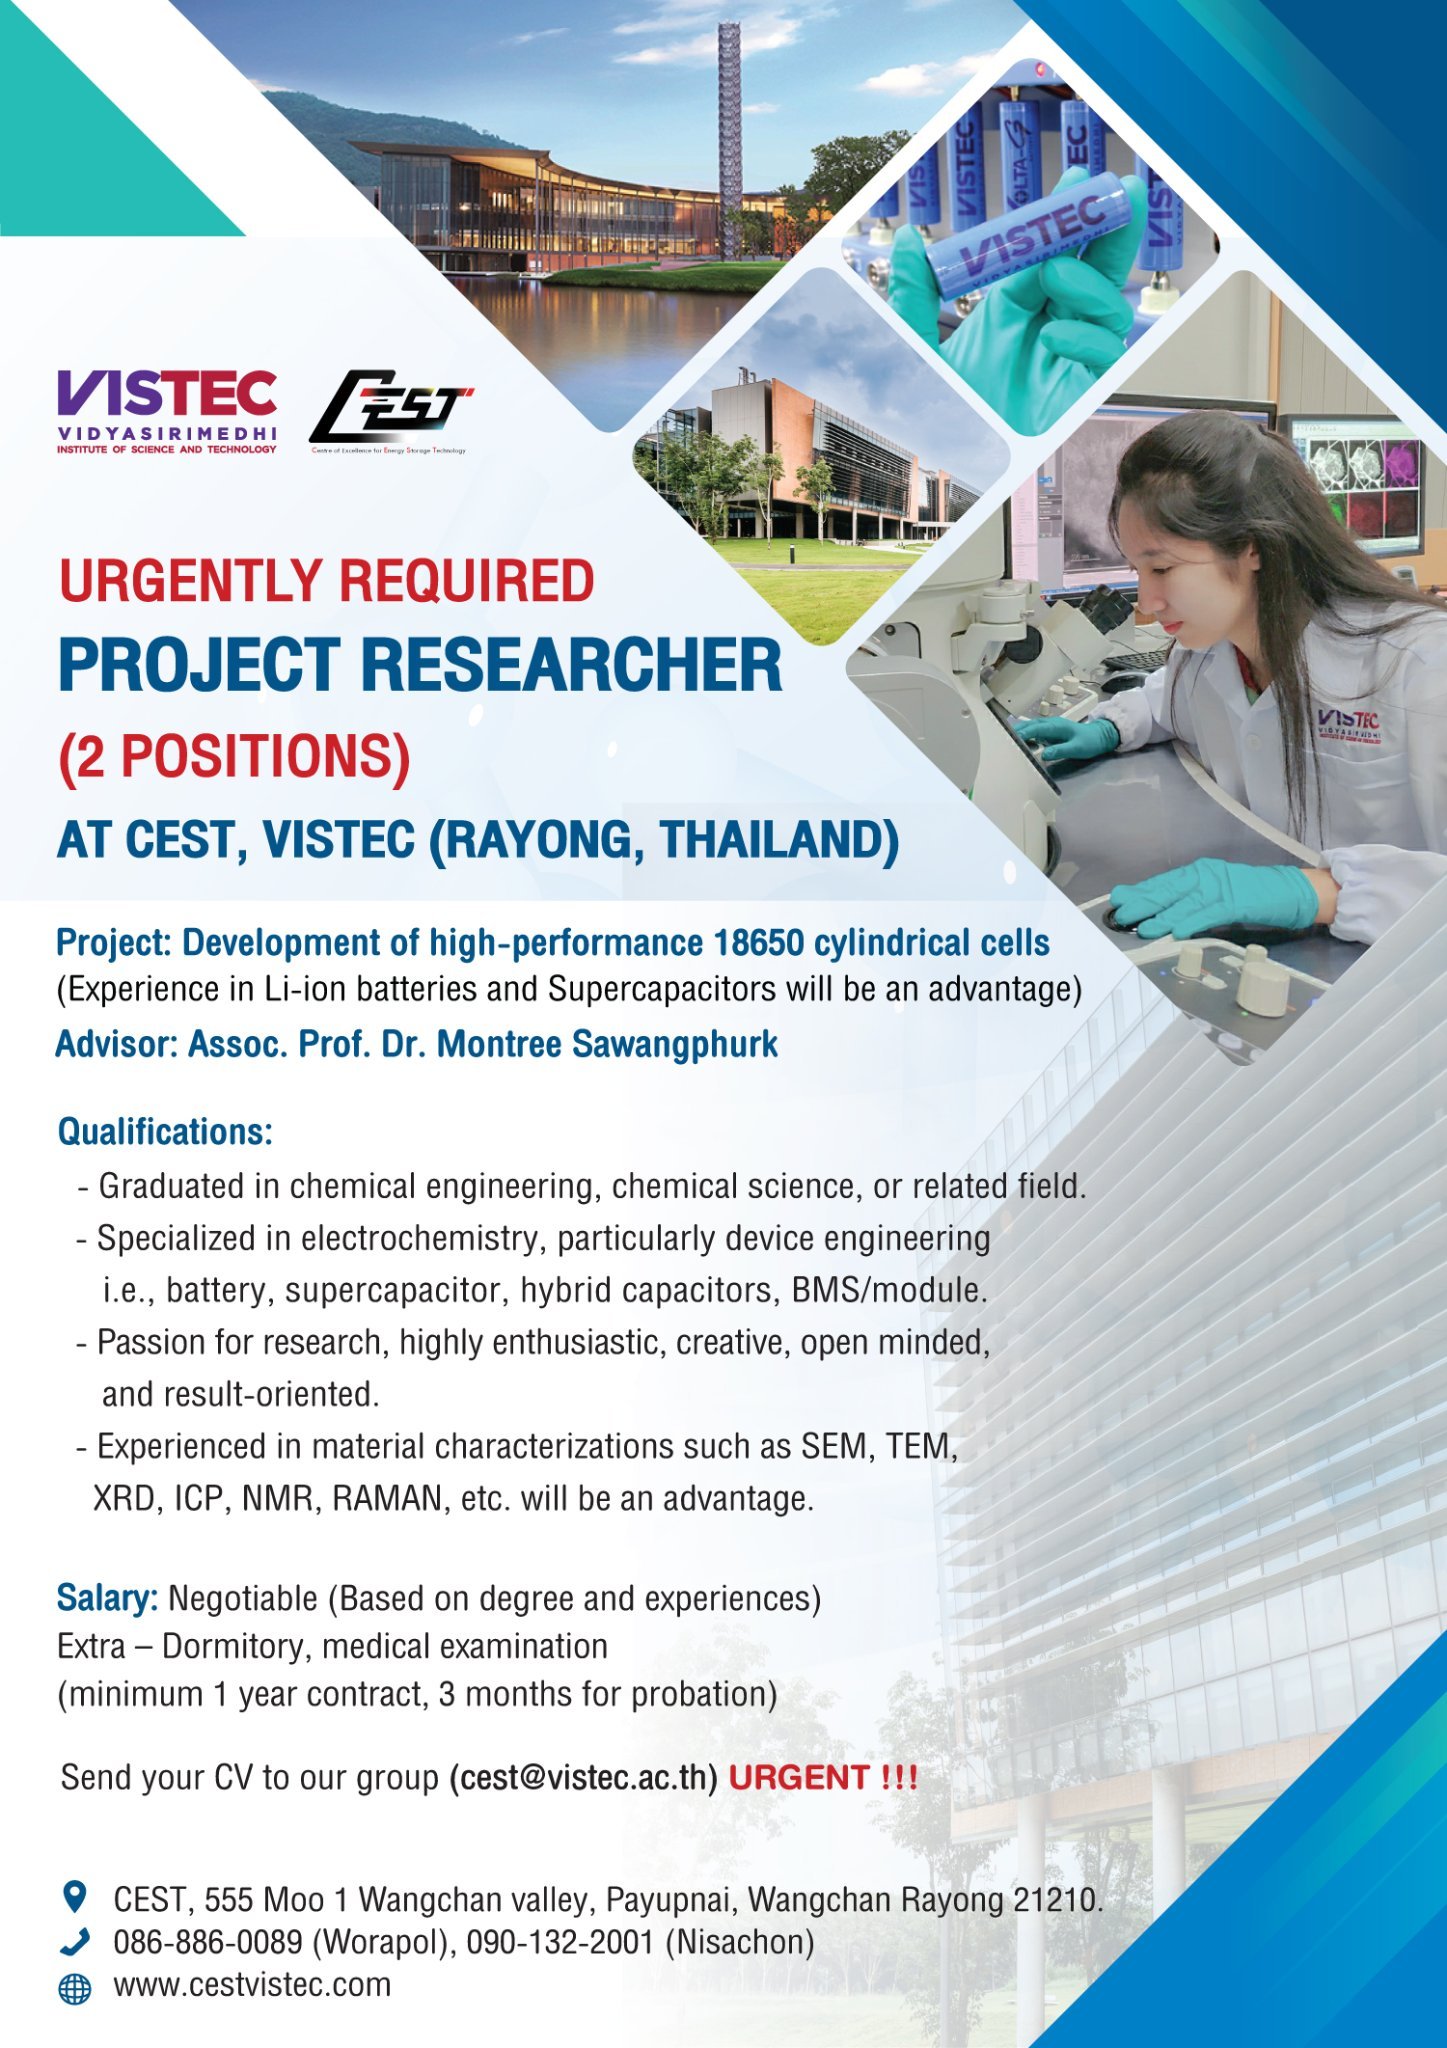 URGENTLY REQUIRED PROJECT RESEARCHER (2 POSITIONS) AT CEST, VISTEC (RAYONG, THAILAND)